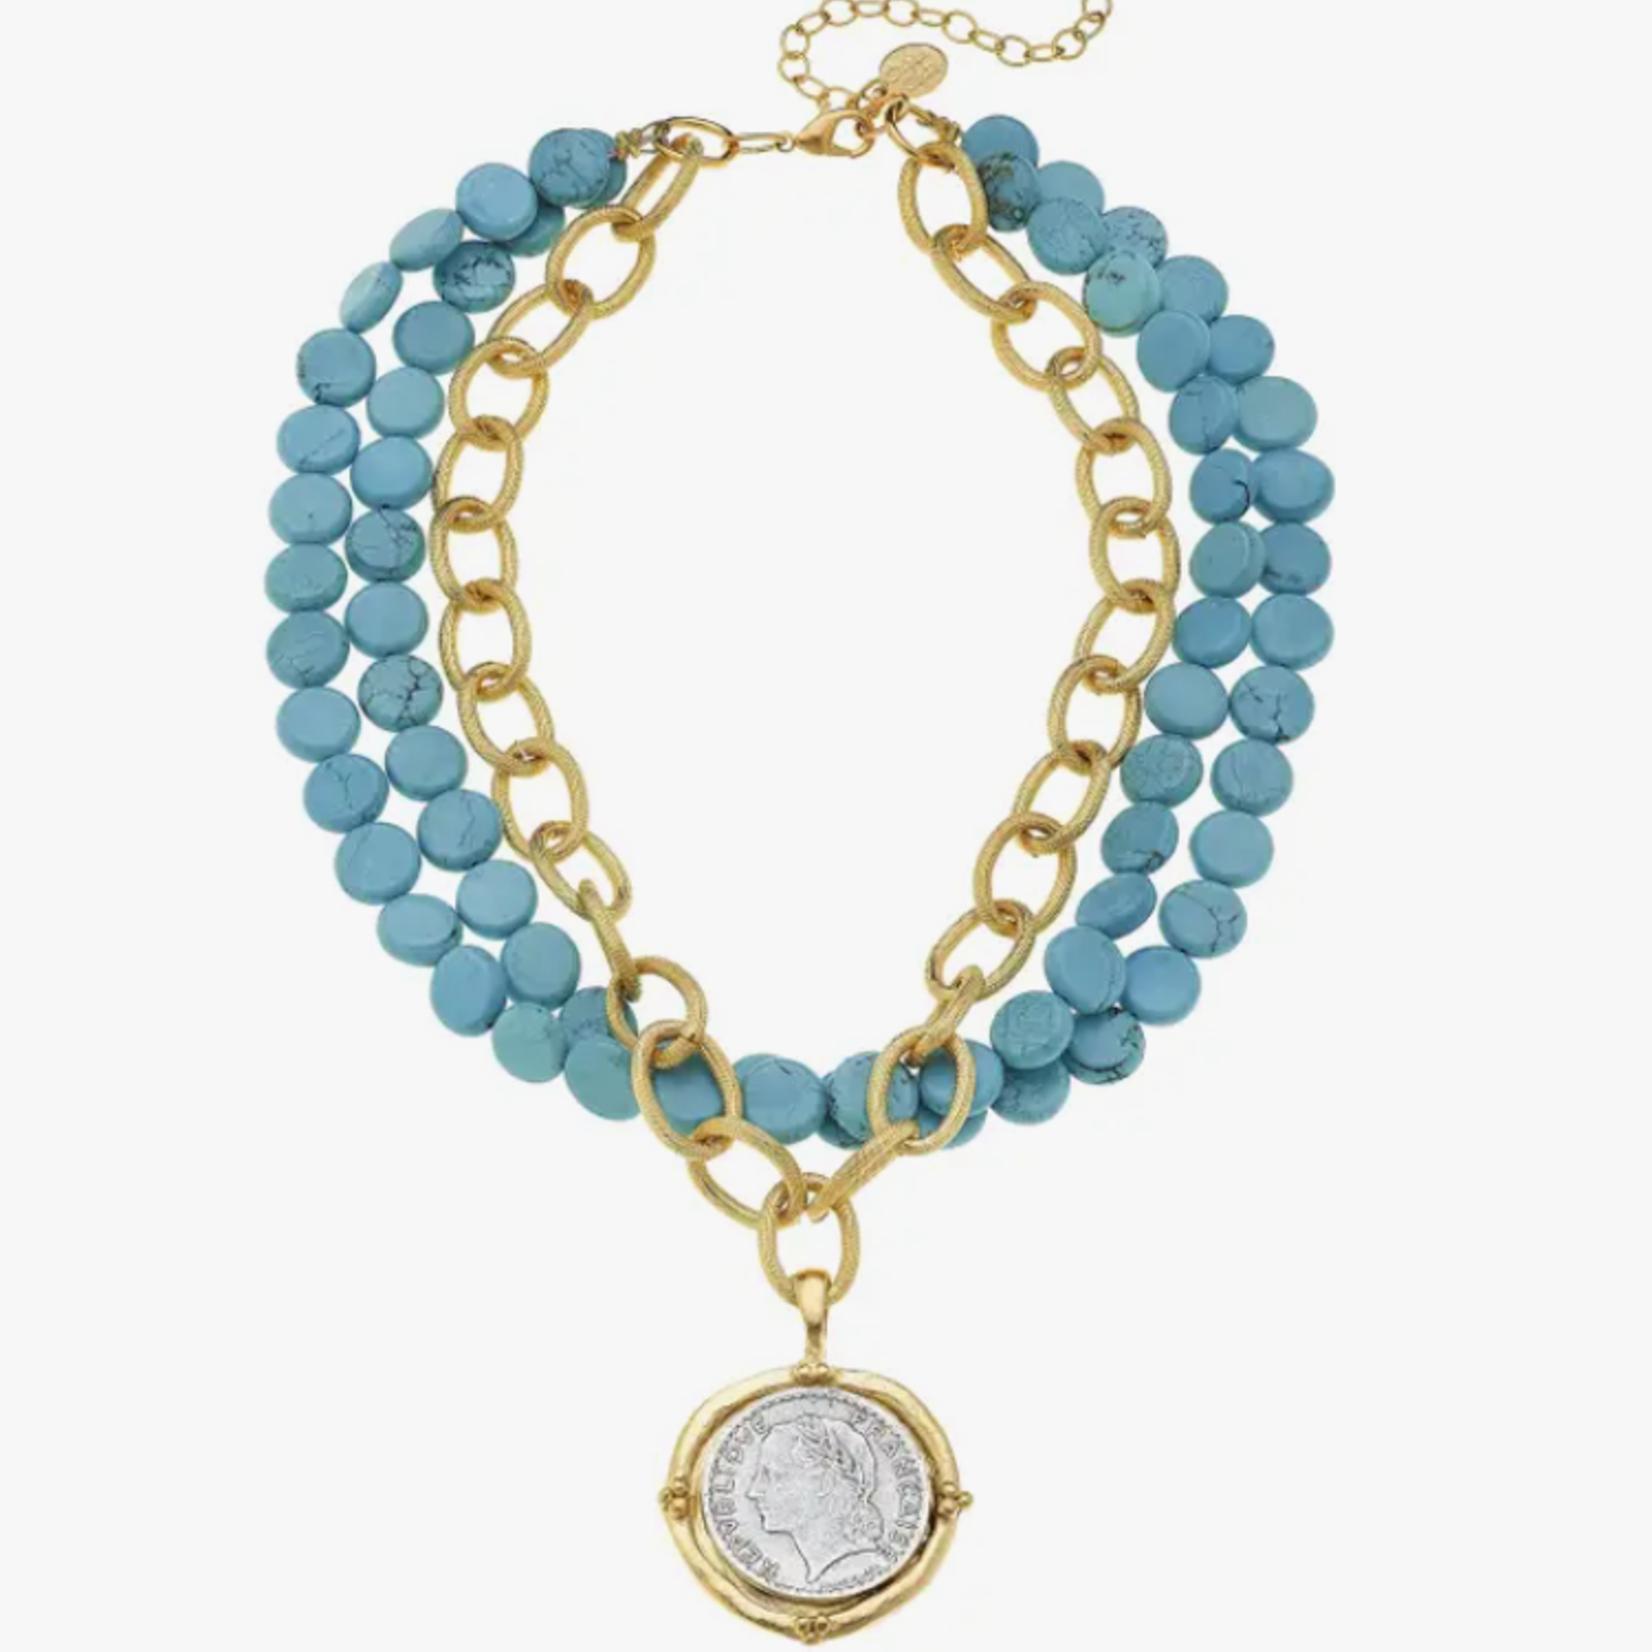 susan shaw Handcast Gold and Silver Coin on Gold Chain and Turquoise